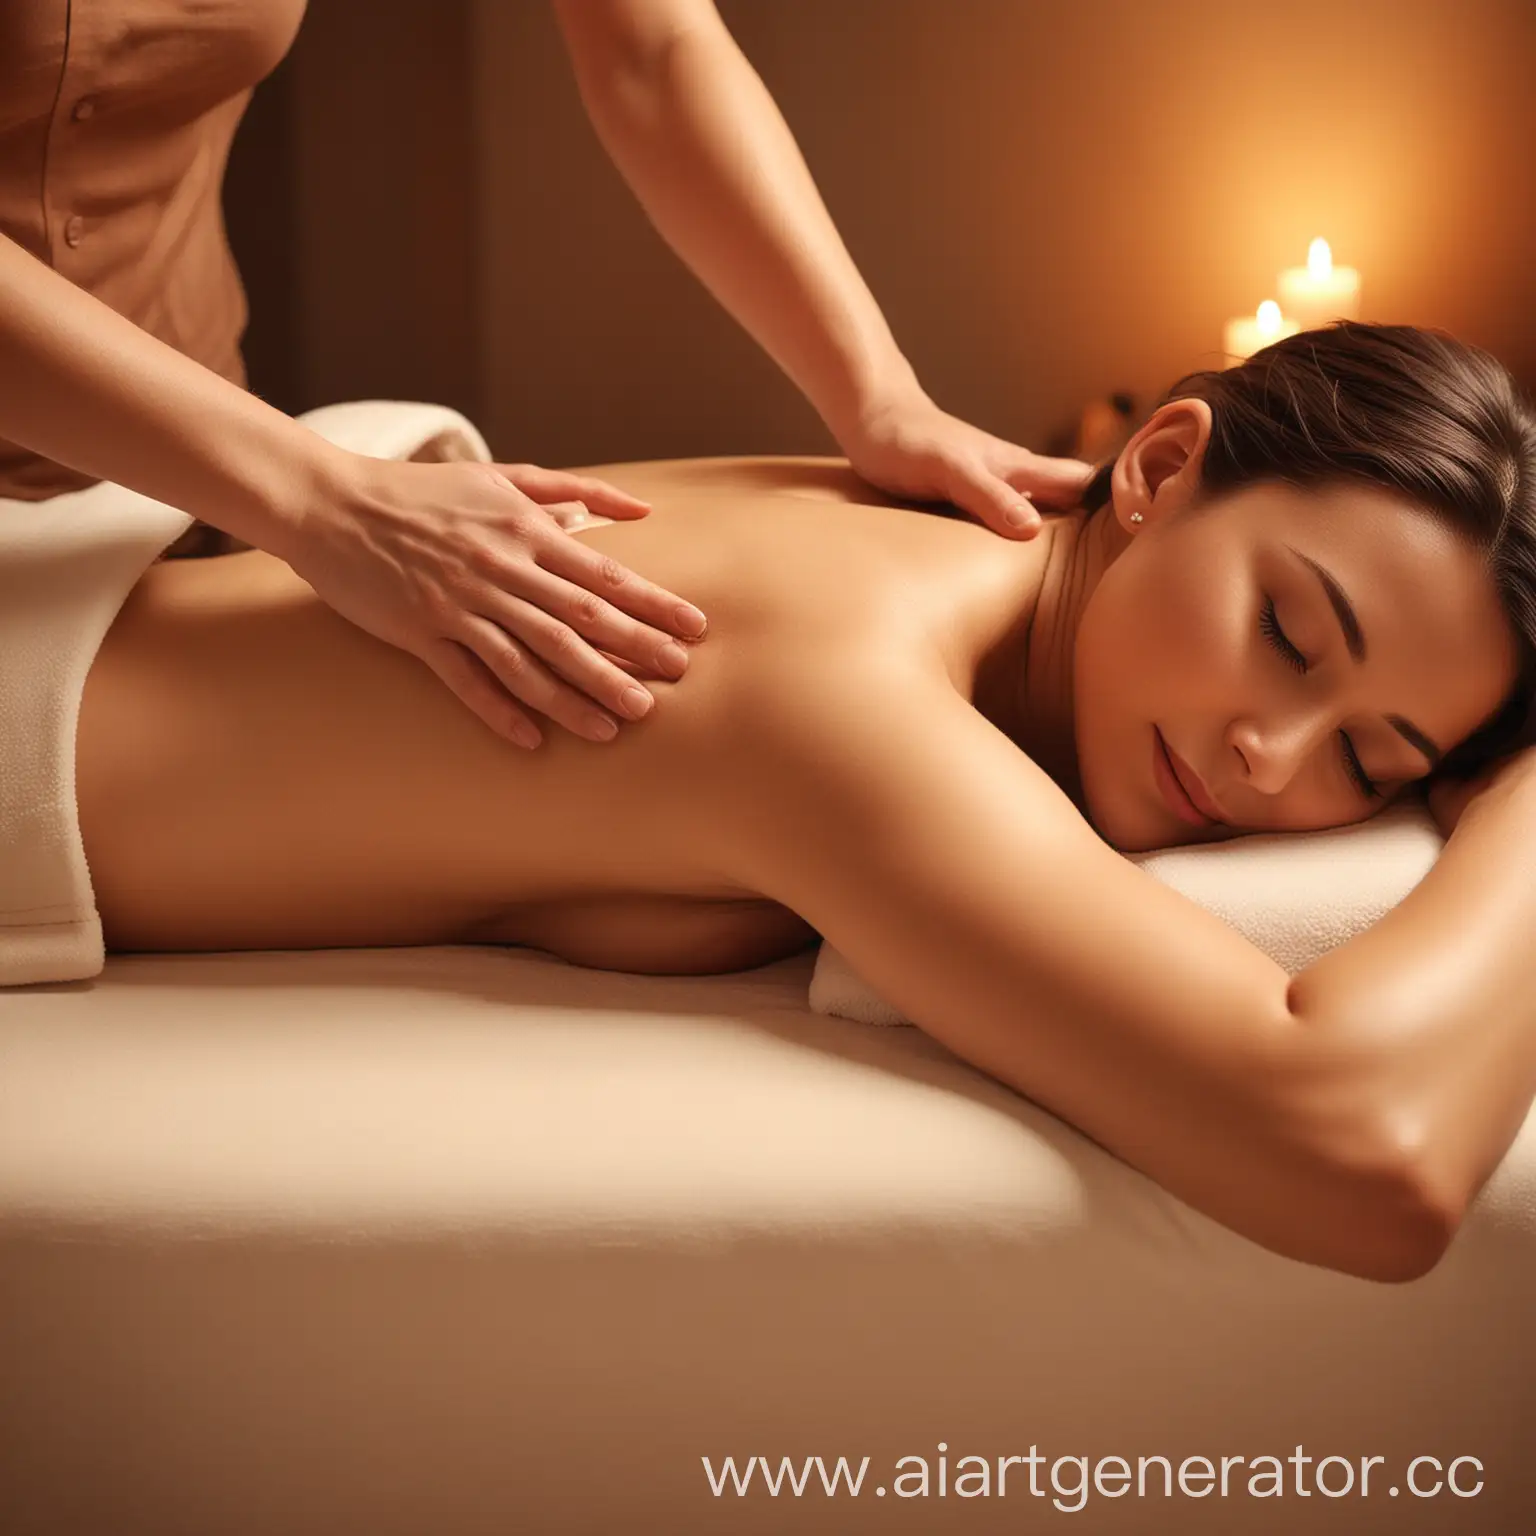 Woman-Receiving-Relaxing-Back-Massage-in-Cozy-Spa-Atmosphere